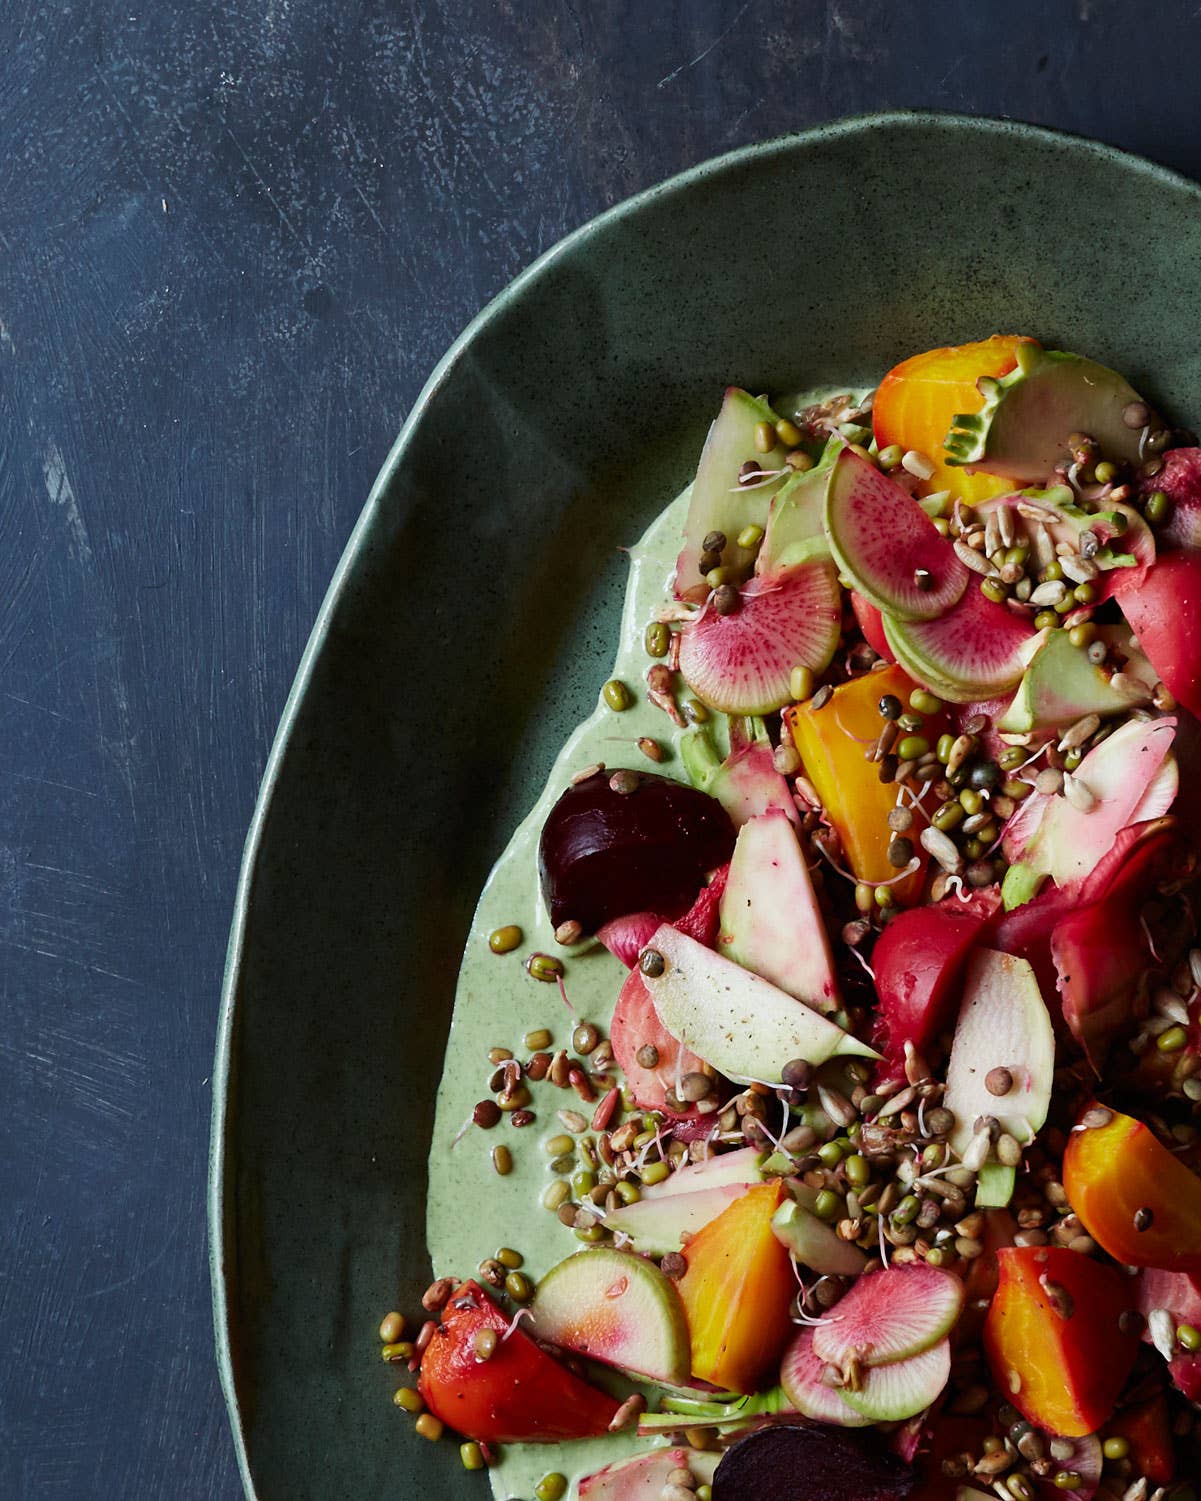 Sprouts, Kohlrabi, and Beet Salad with Herbed Crème Fraîche Dressing